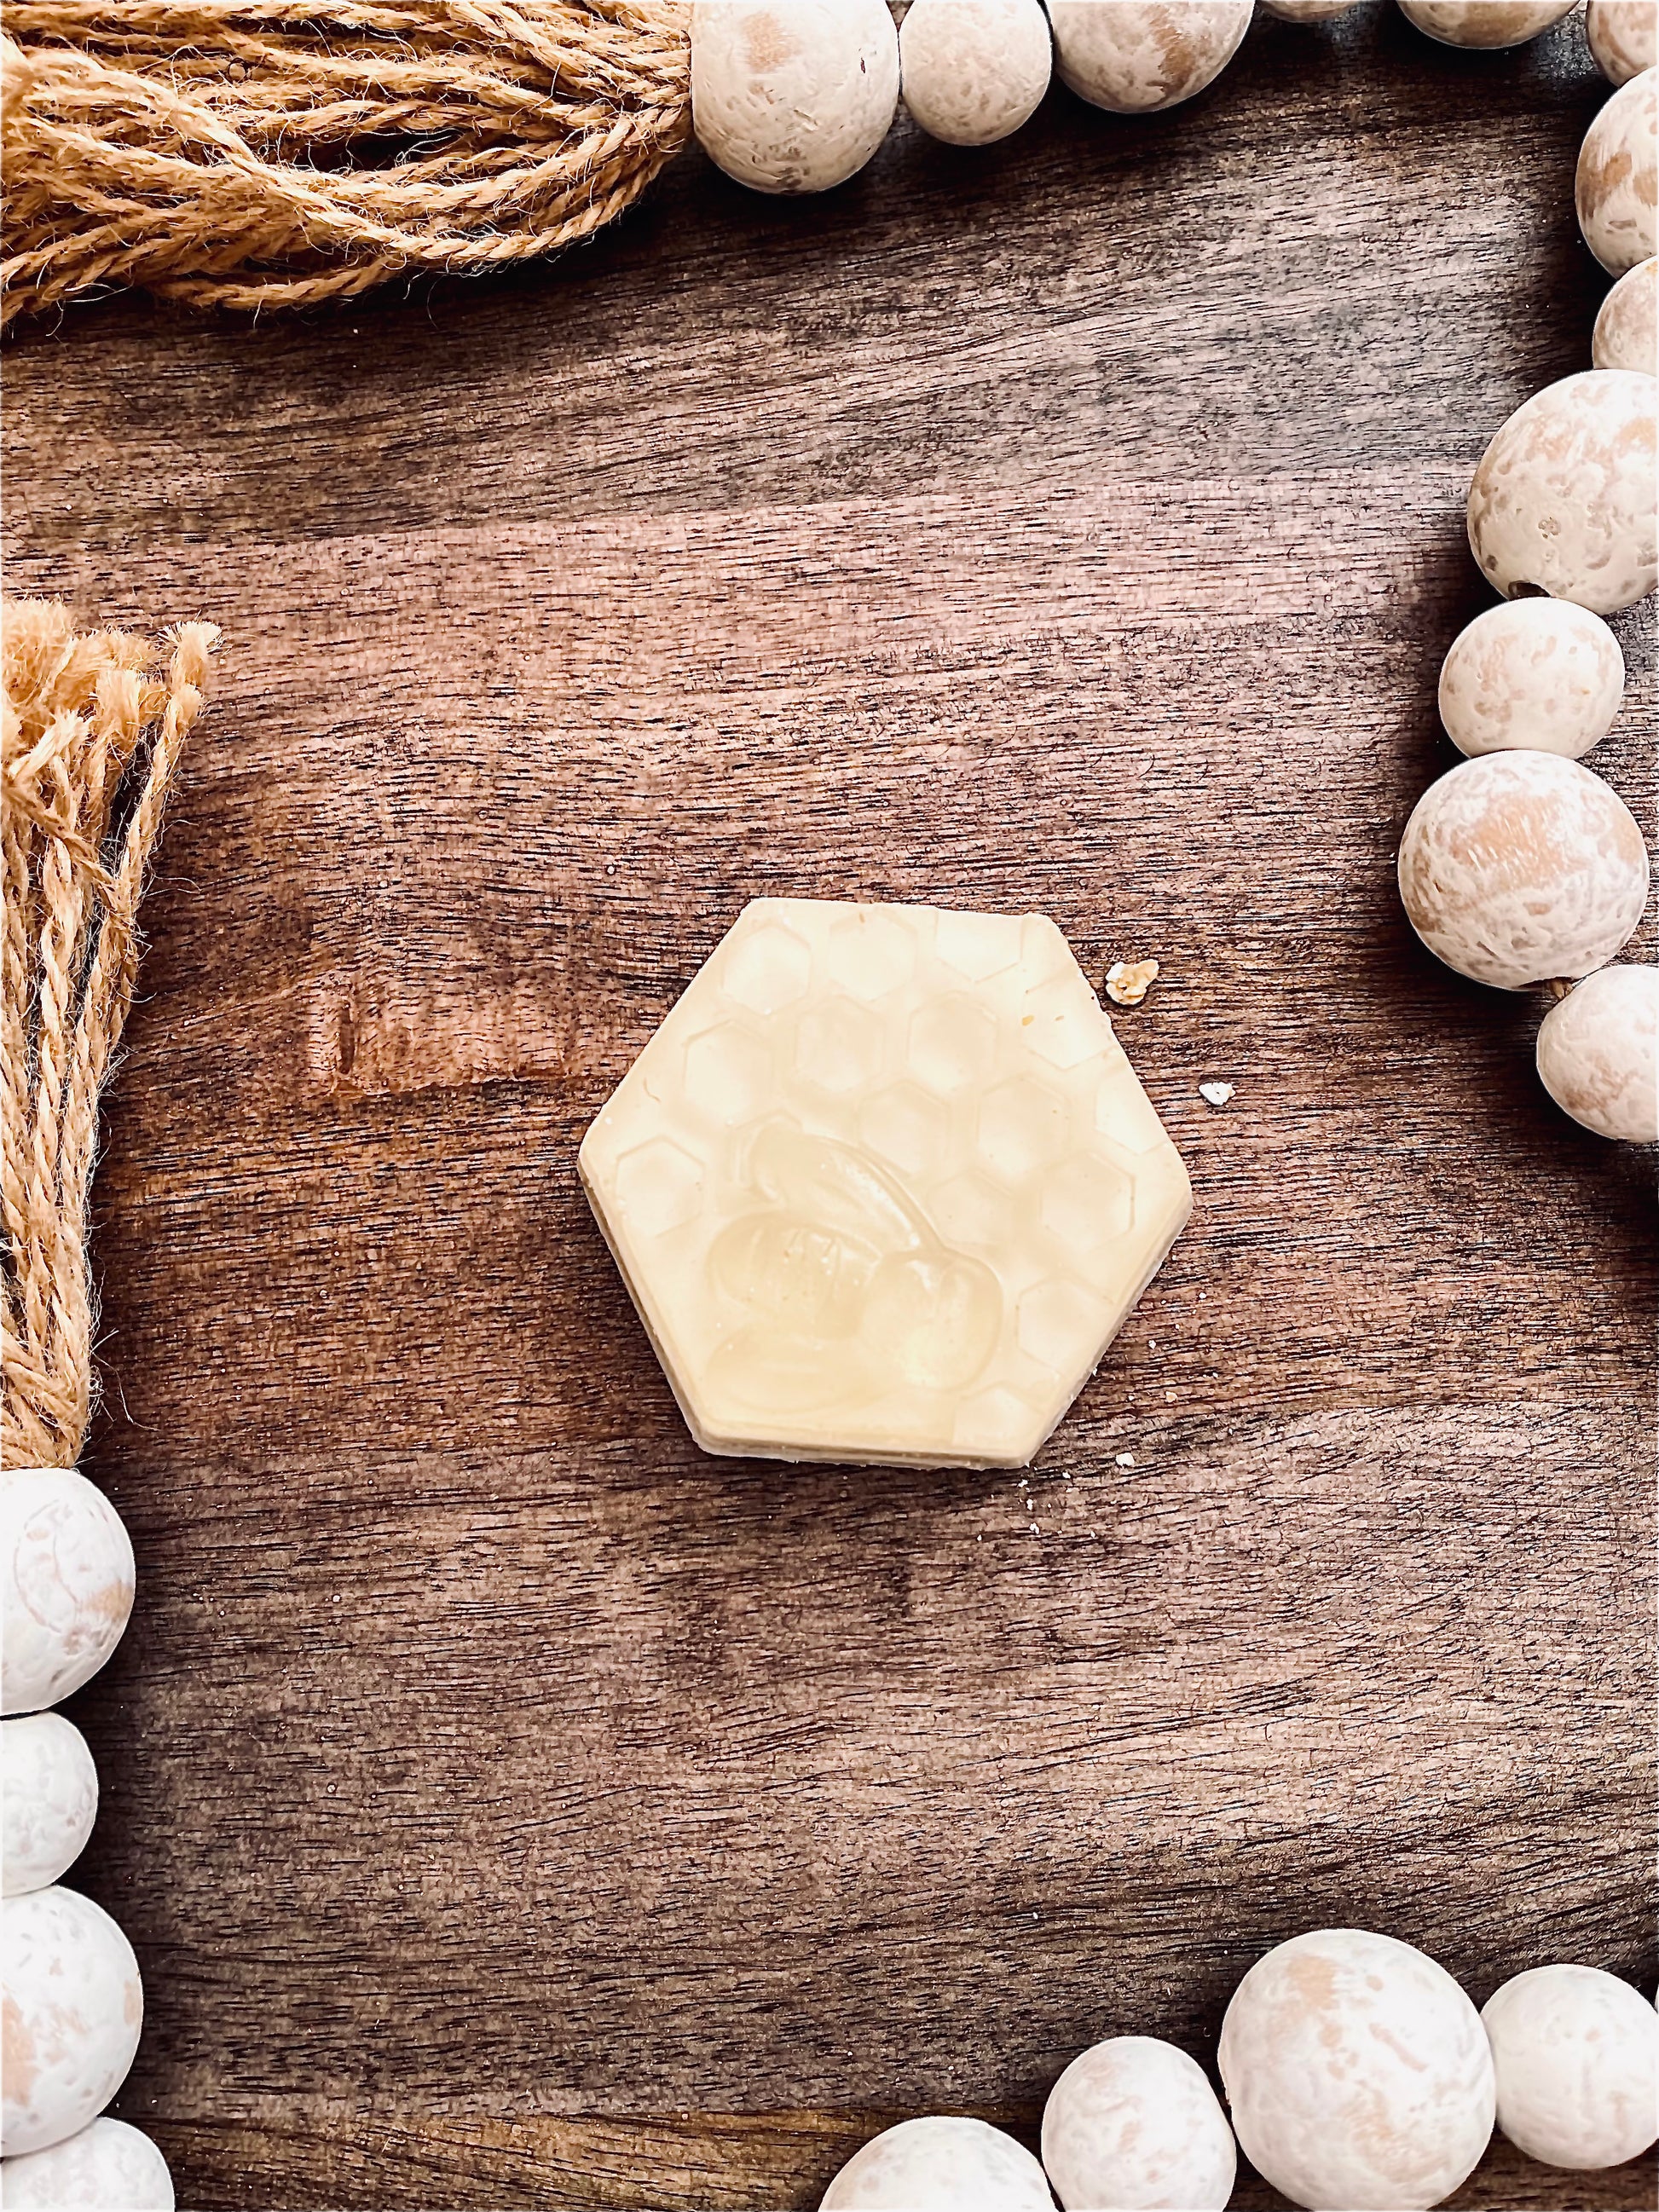 How To Make Oatmeal Soap - The Honeycomb Home